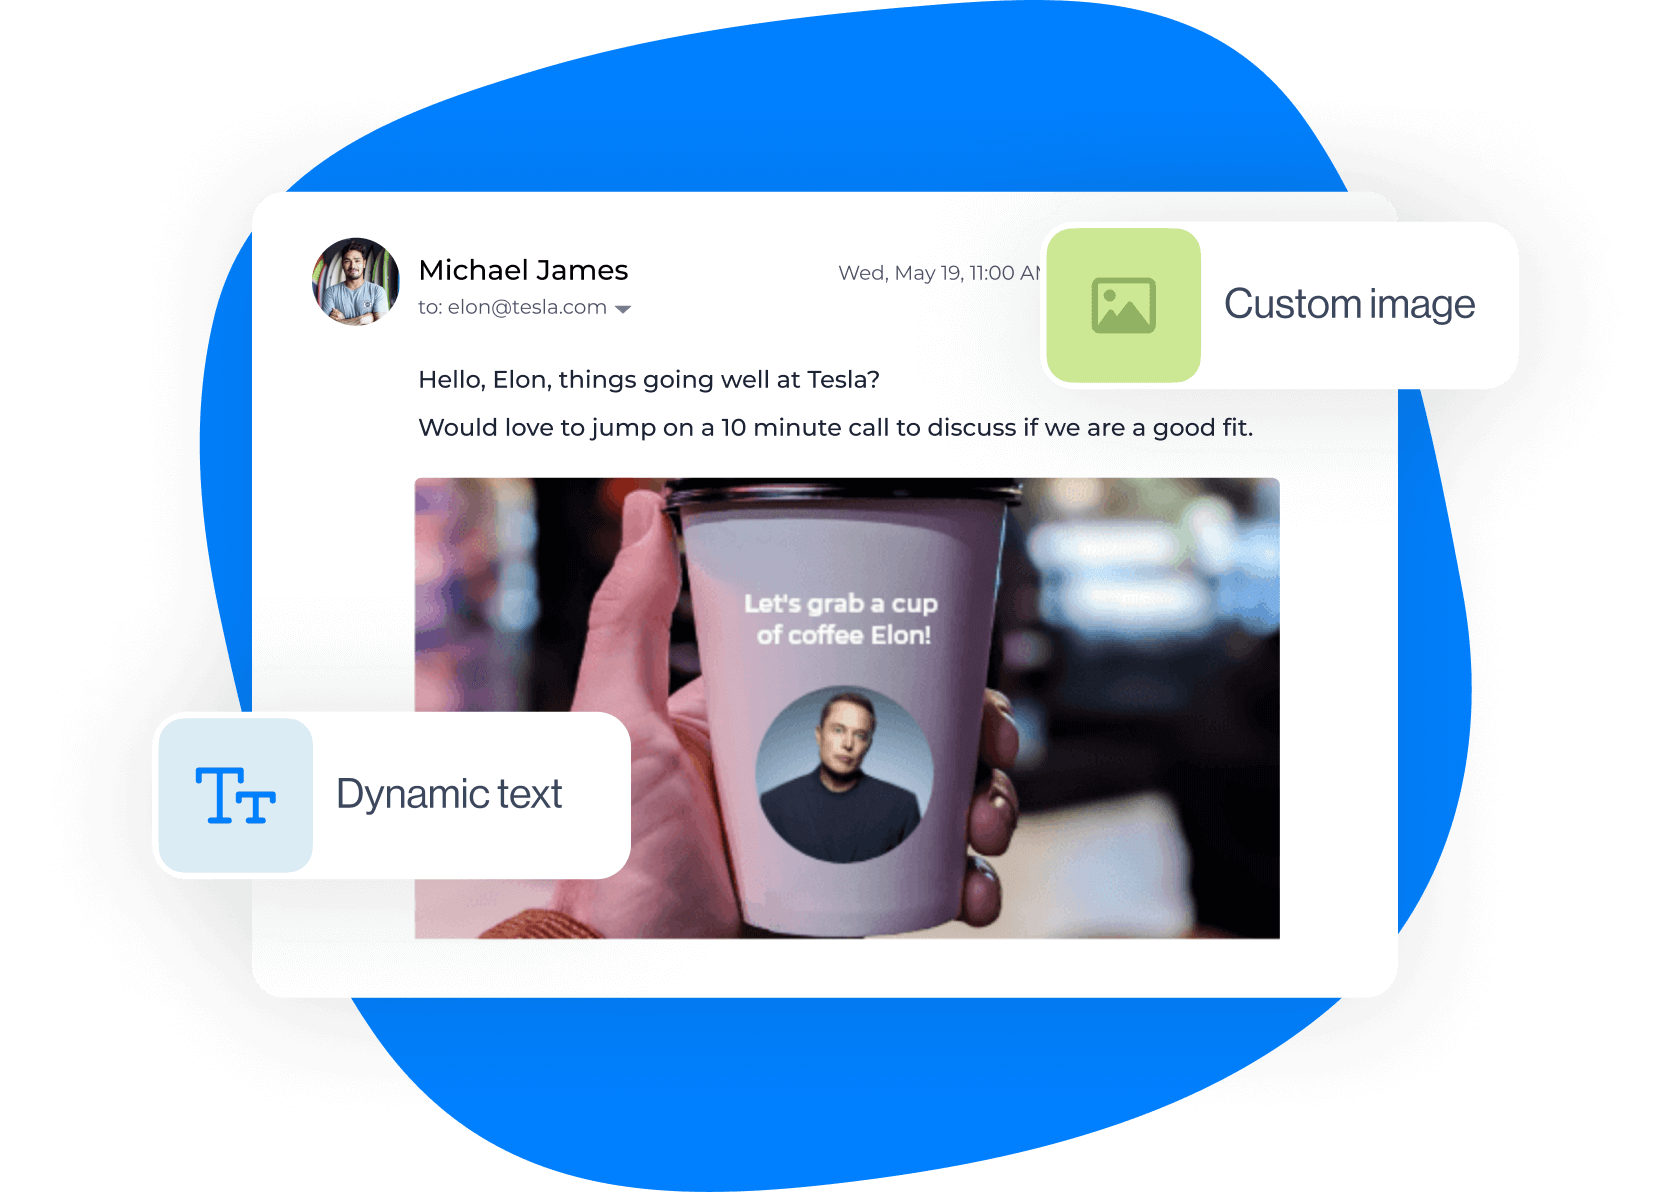 Image of Skylead's feature of image personalization and how it looks like in an email; cards with Dynamic text and Custom image text